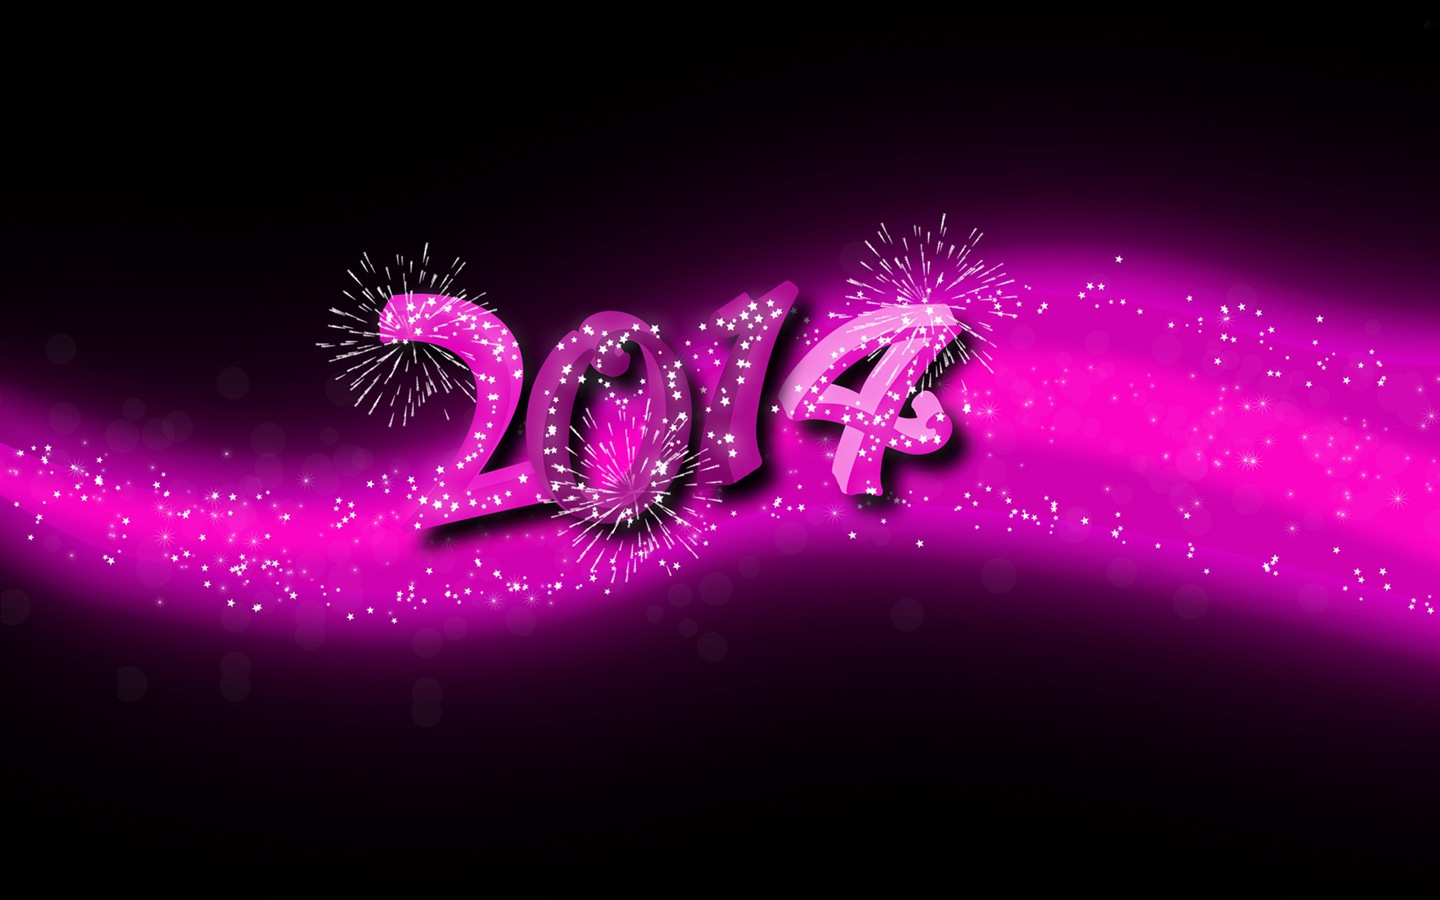 2014 New Year Theme HD Wallpapers (2) #4 - 1440x900